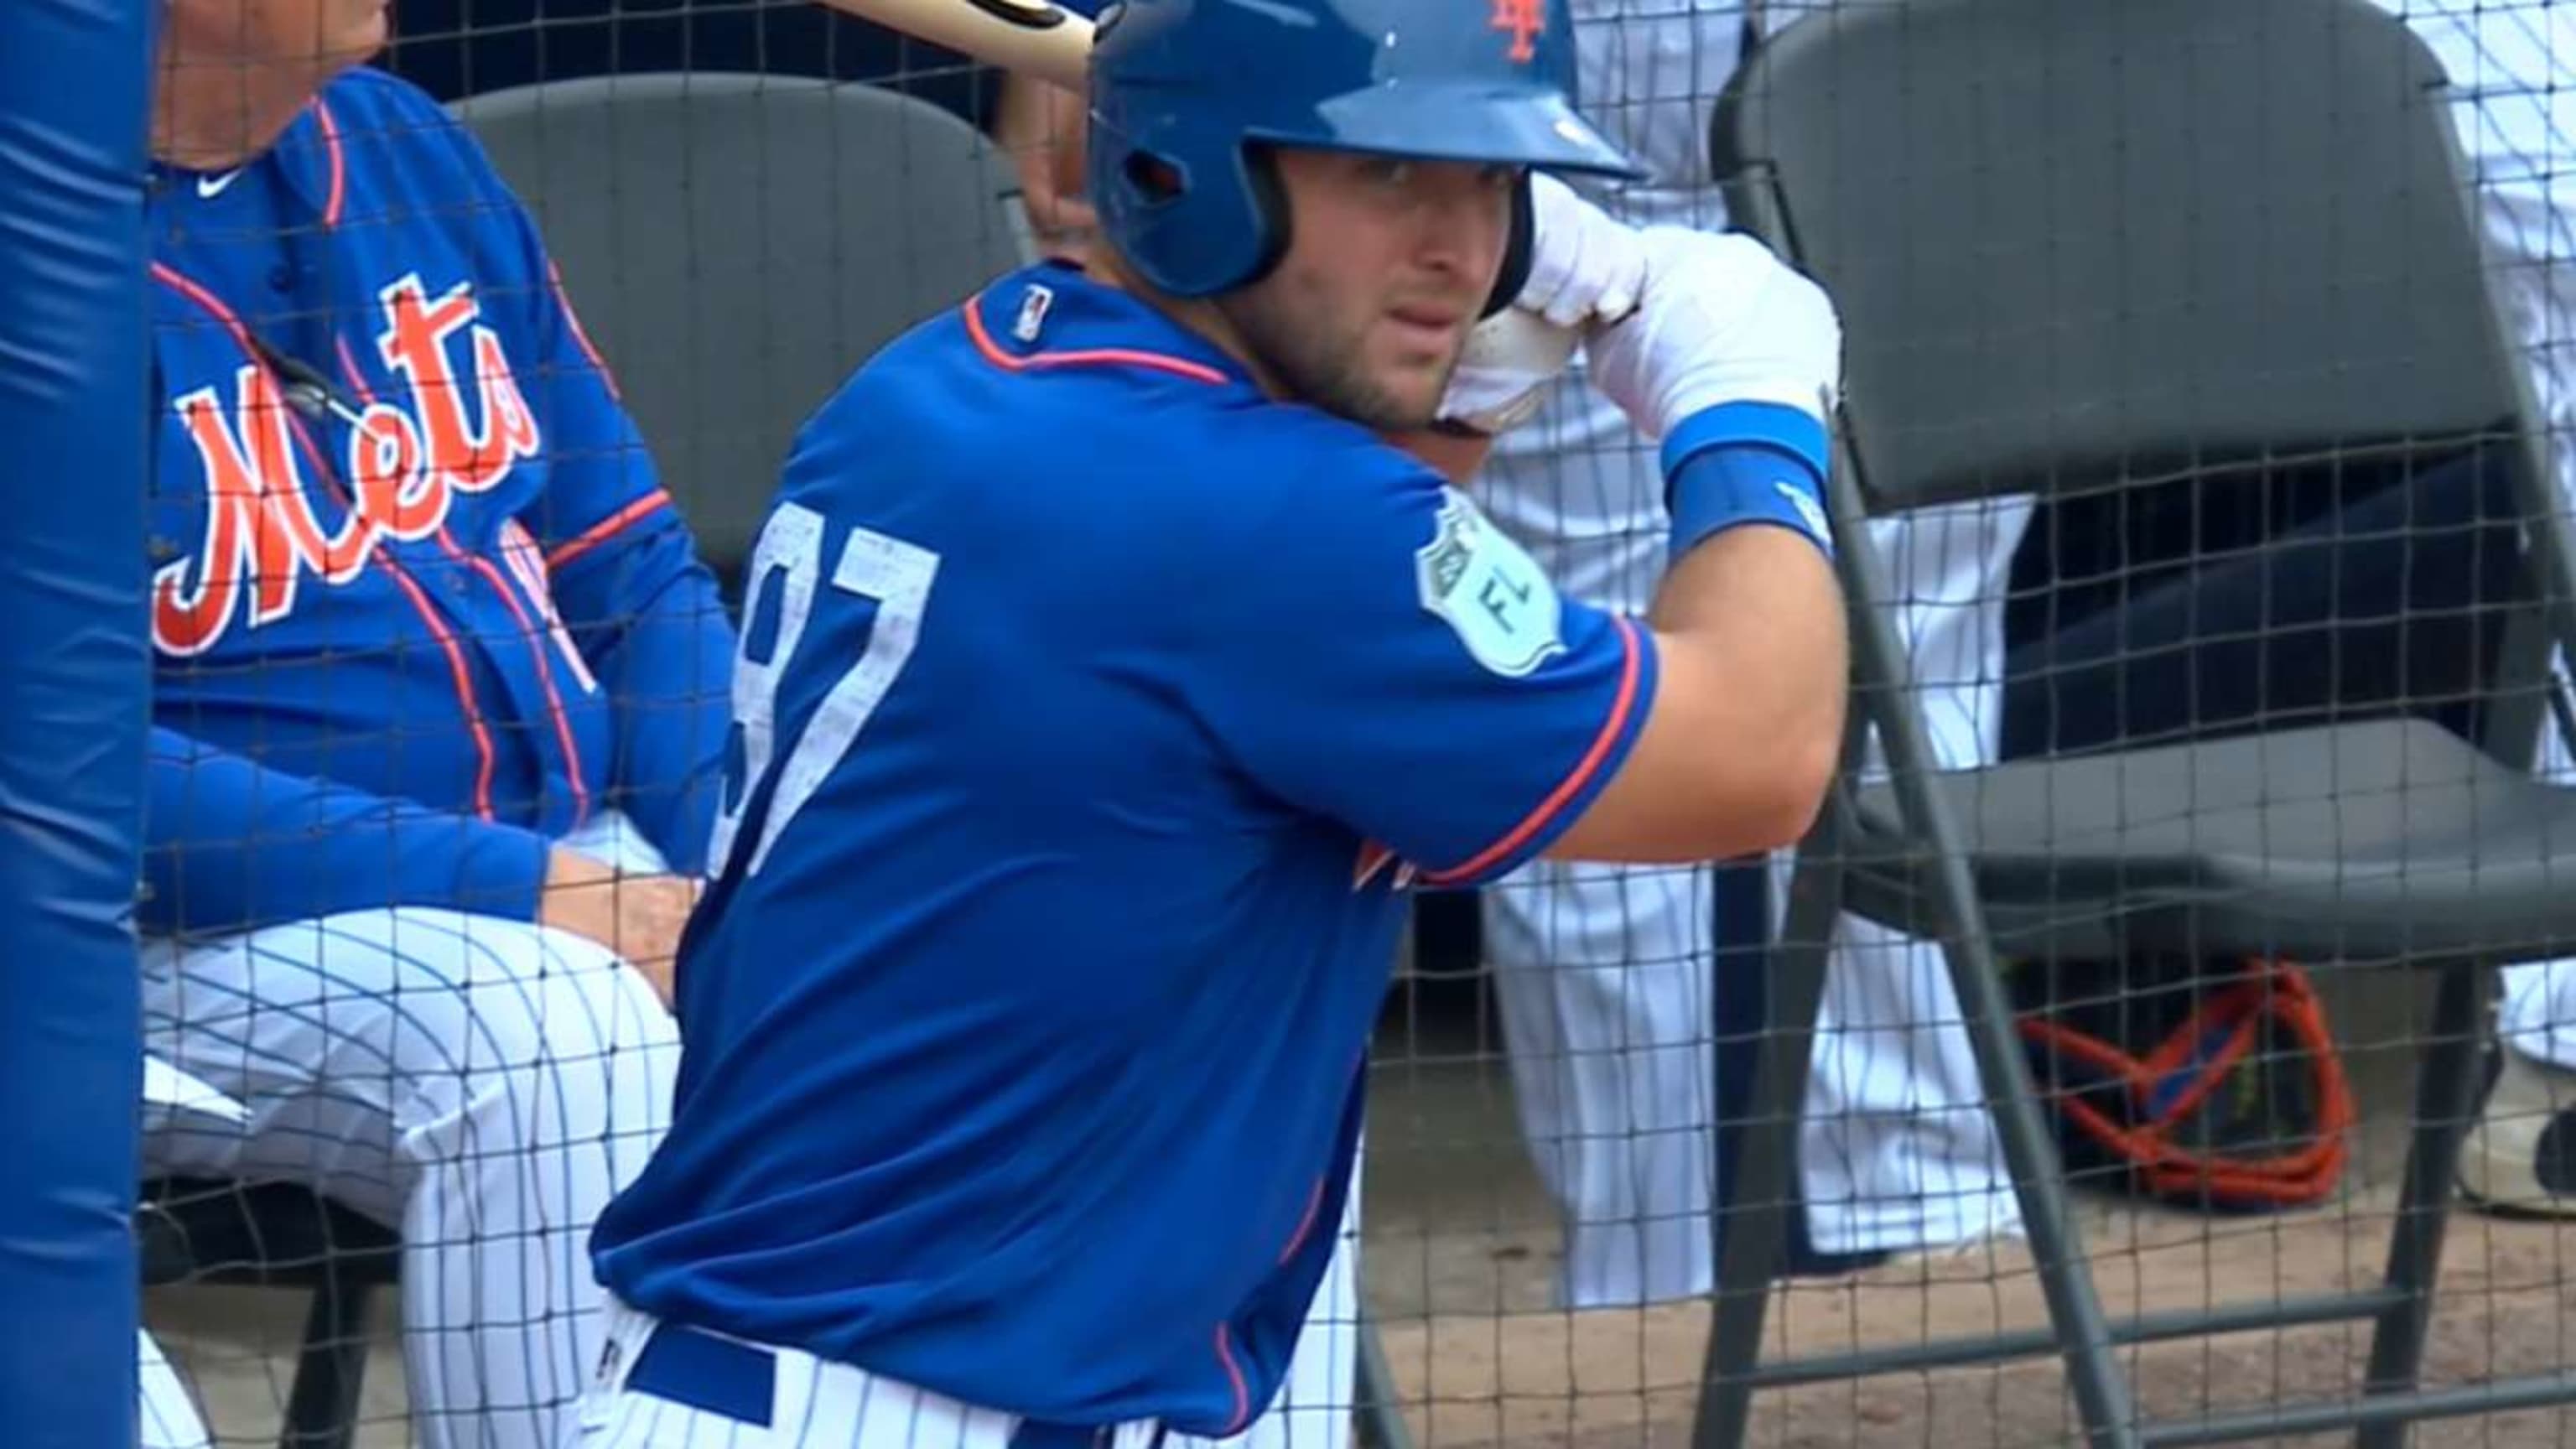 Tim Tebow's Mets jersey already leads MLB sales